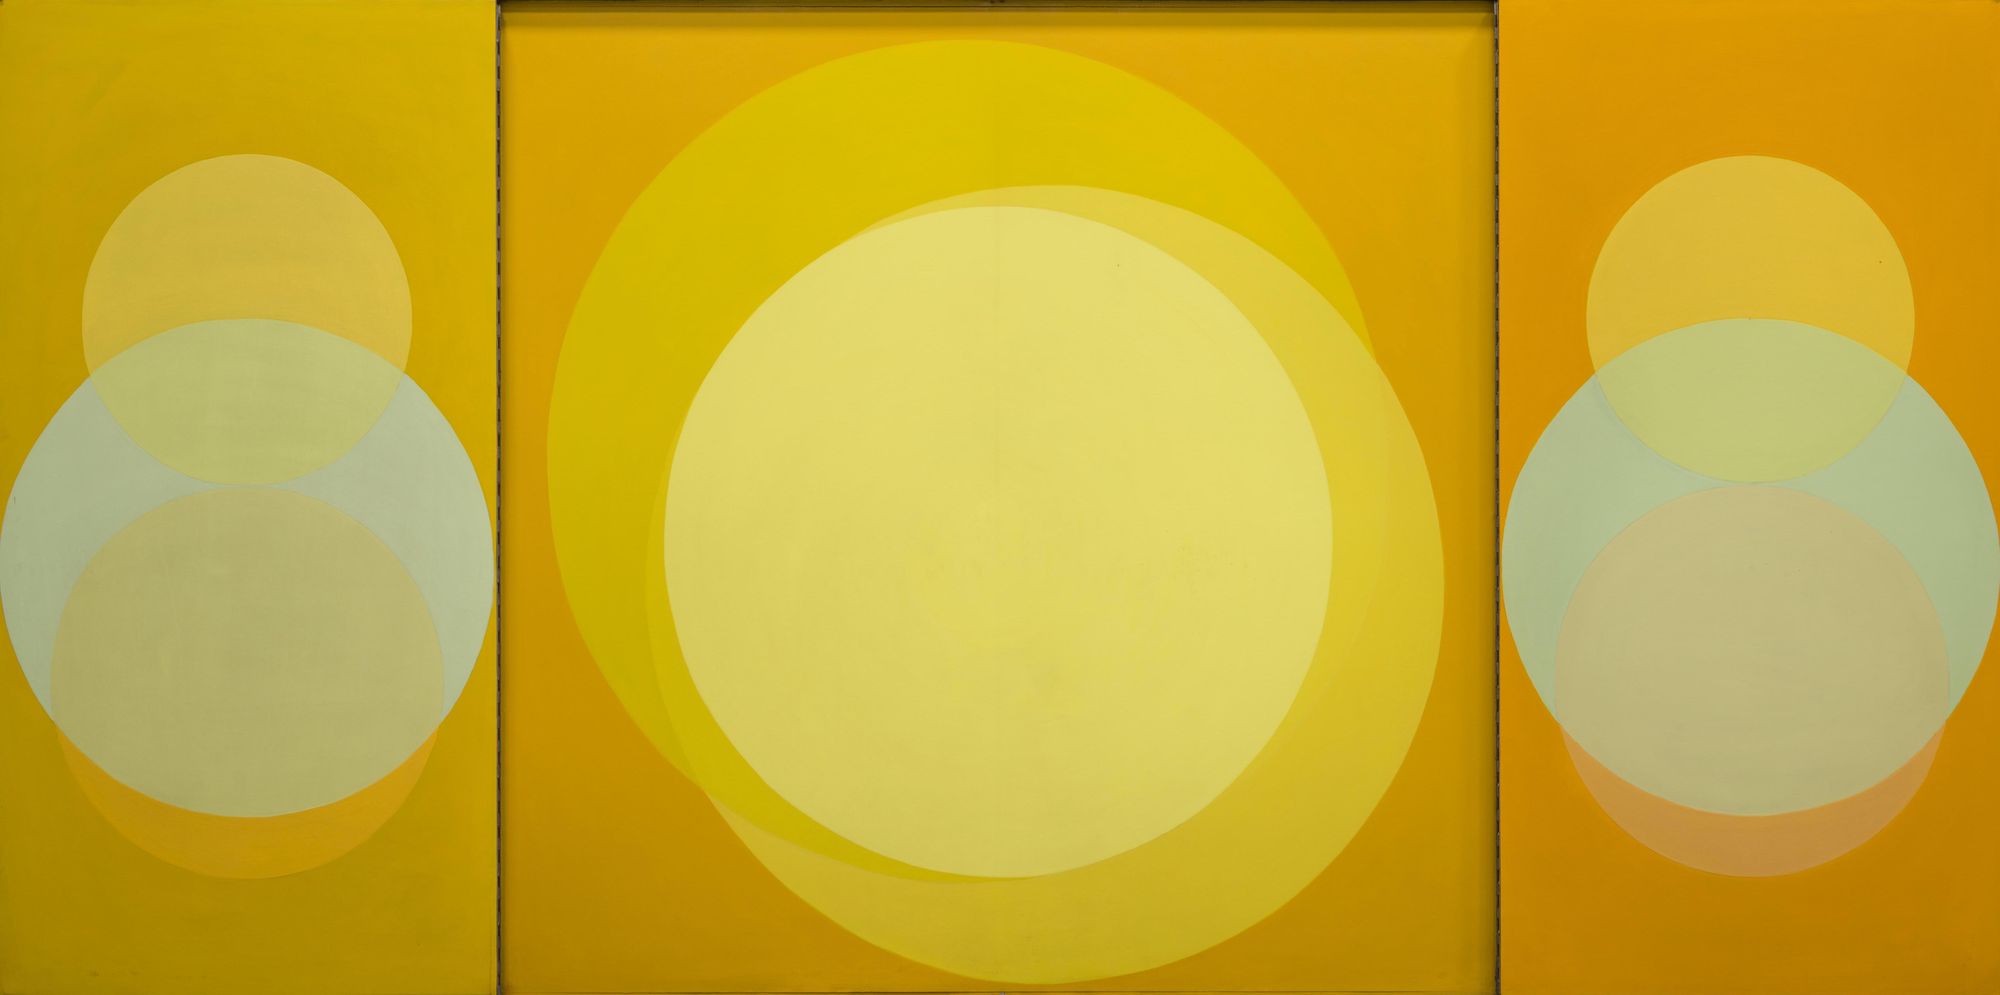 A folding panel of three parts featuring bright yellow, circular shapes.